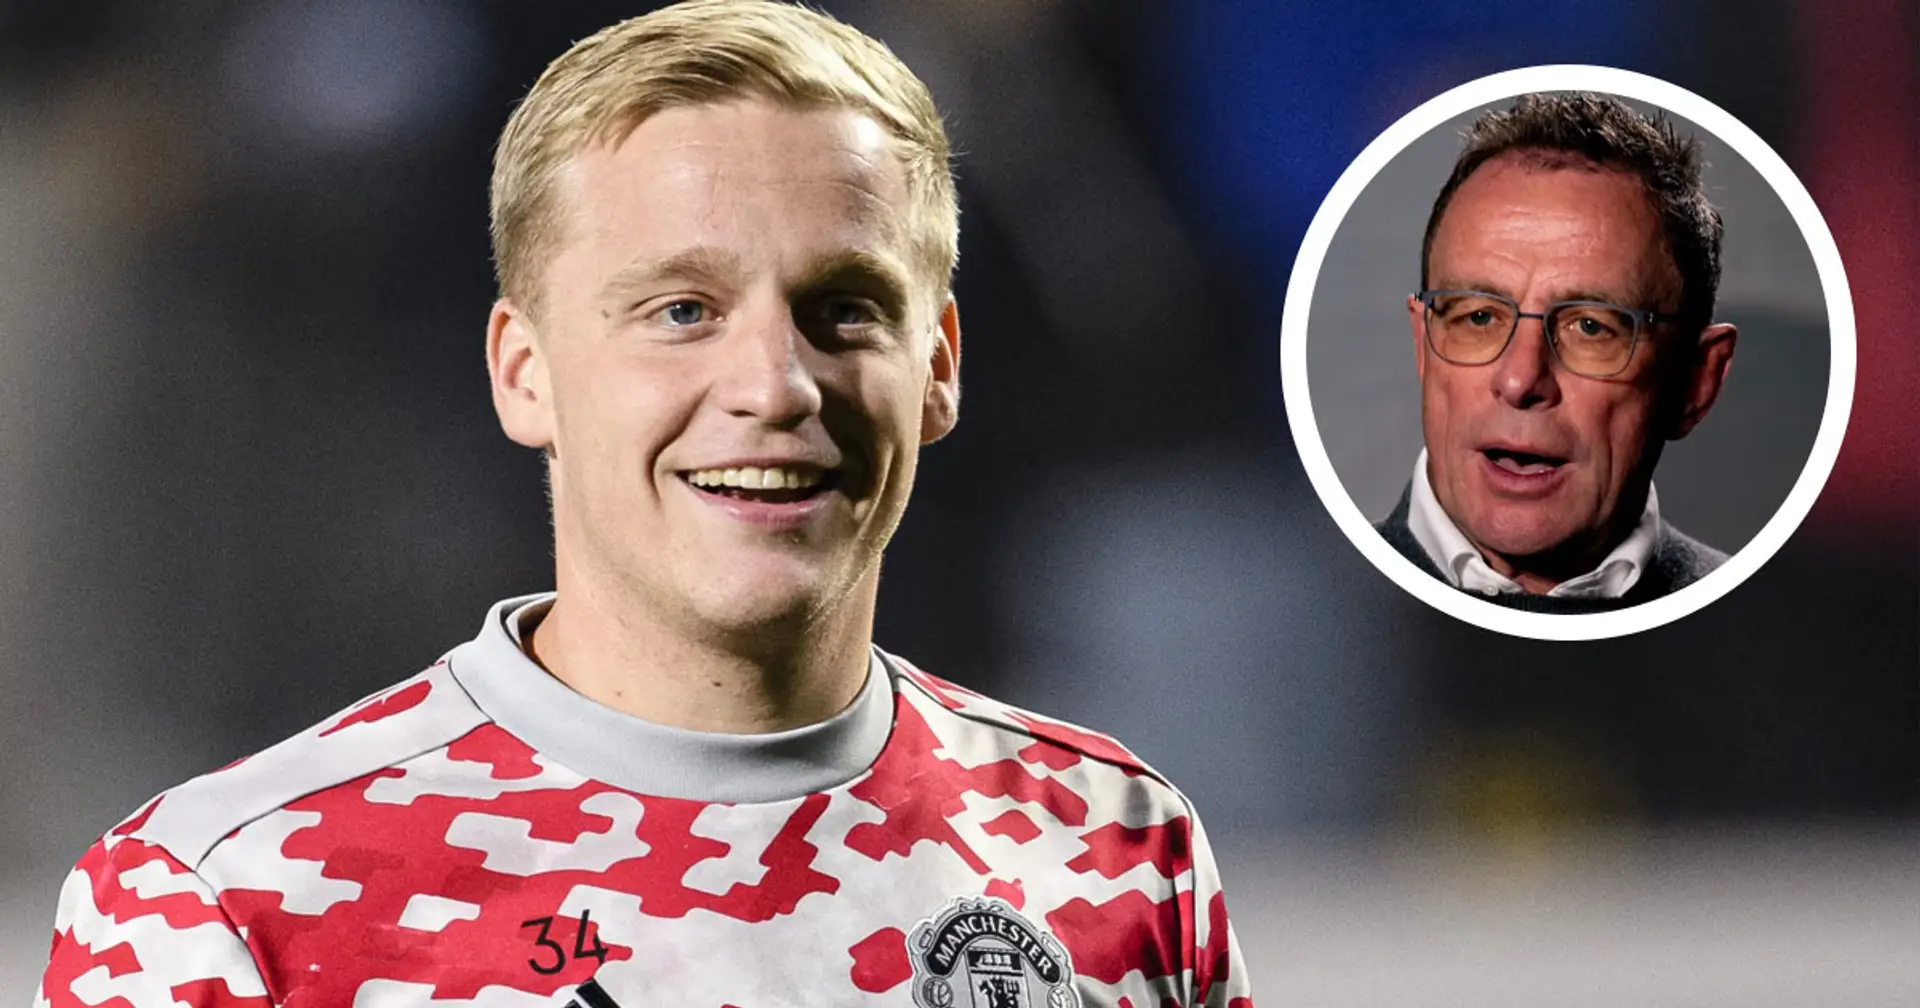 'I like Donny as a player’: Rangnick opens up on Van de Beek's future at United amid Ten Hag links